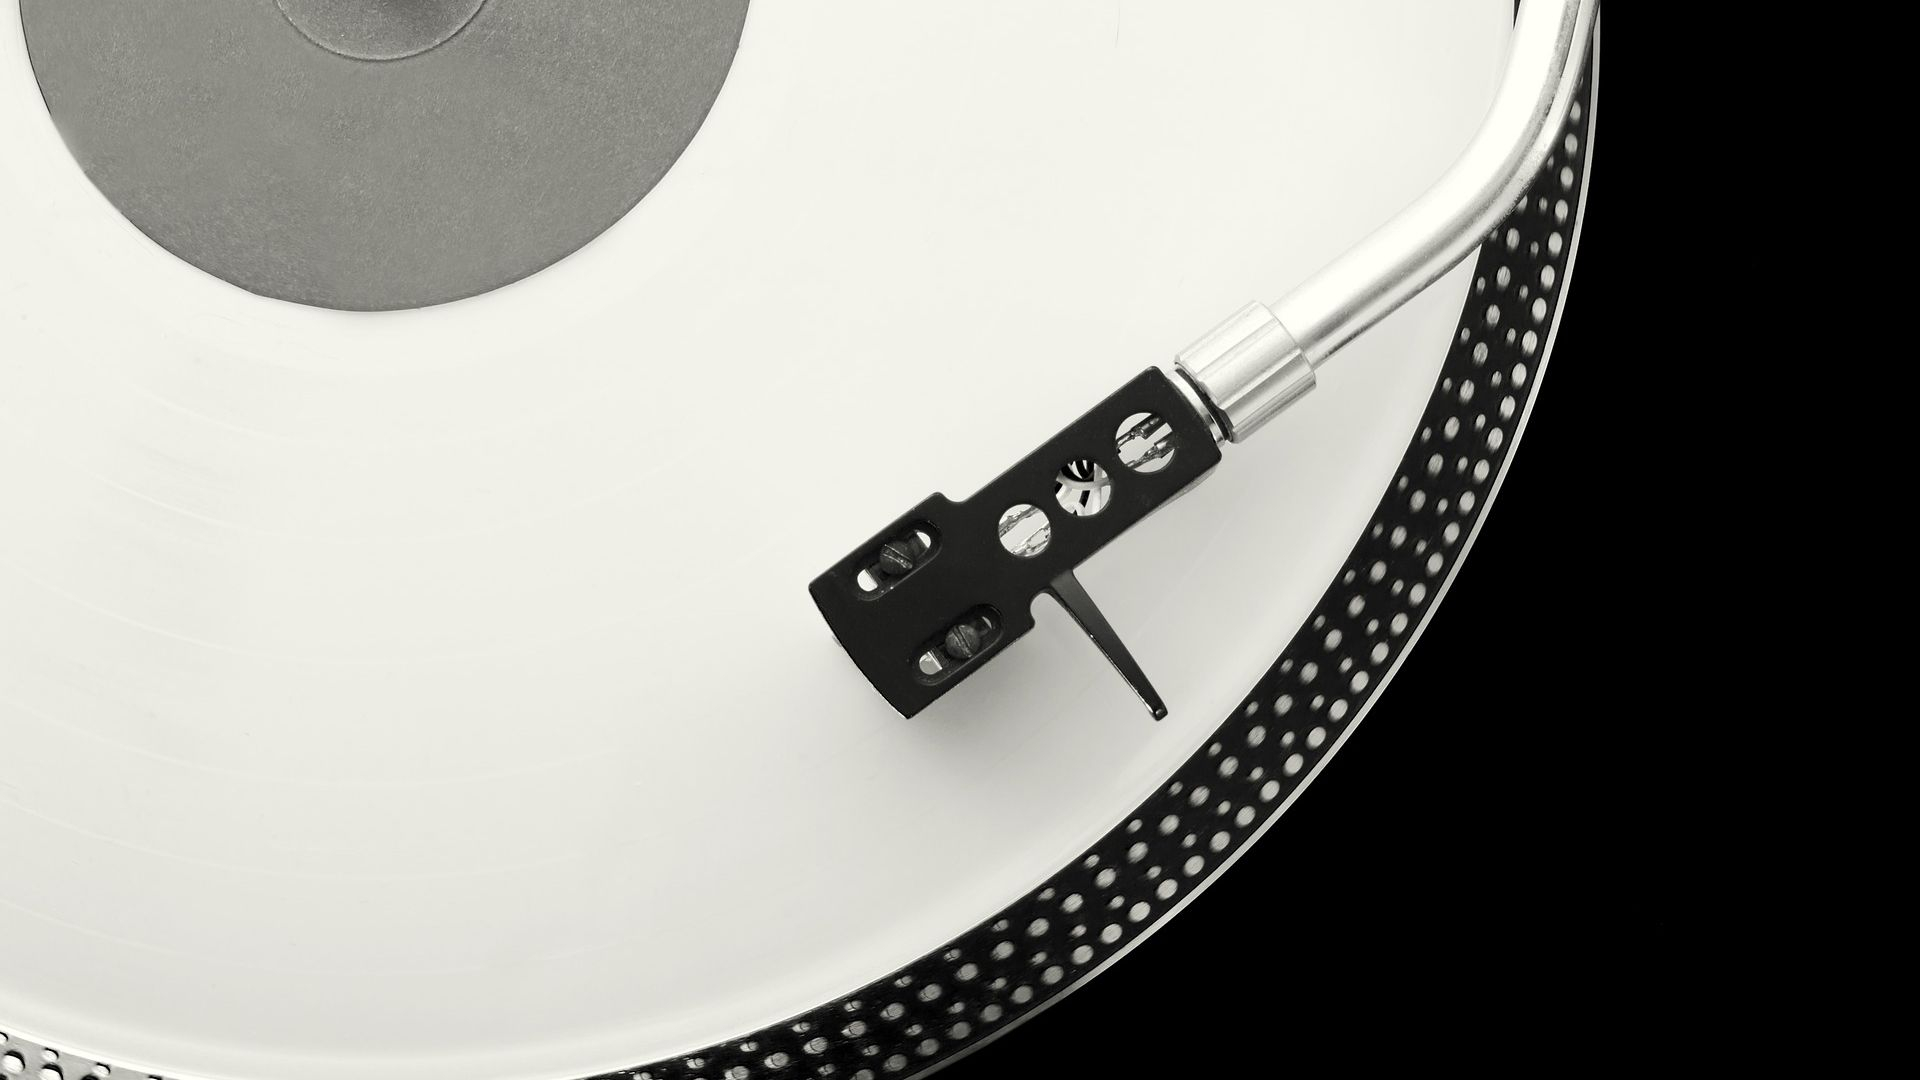 1920x1080 Desktop Wallpaper Turntable Record, Music, Monochrome, Hd Image, Picture, Background, Gkvscw